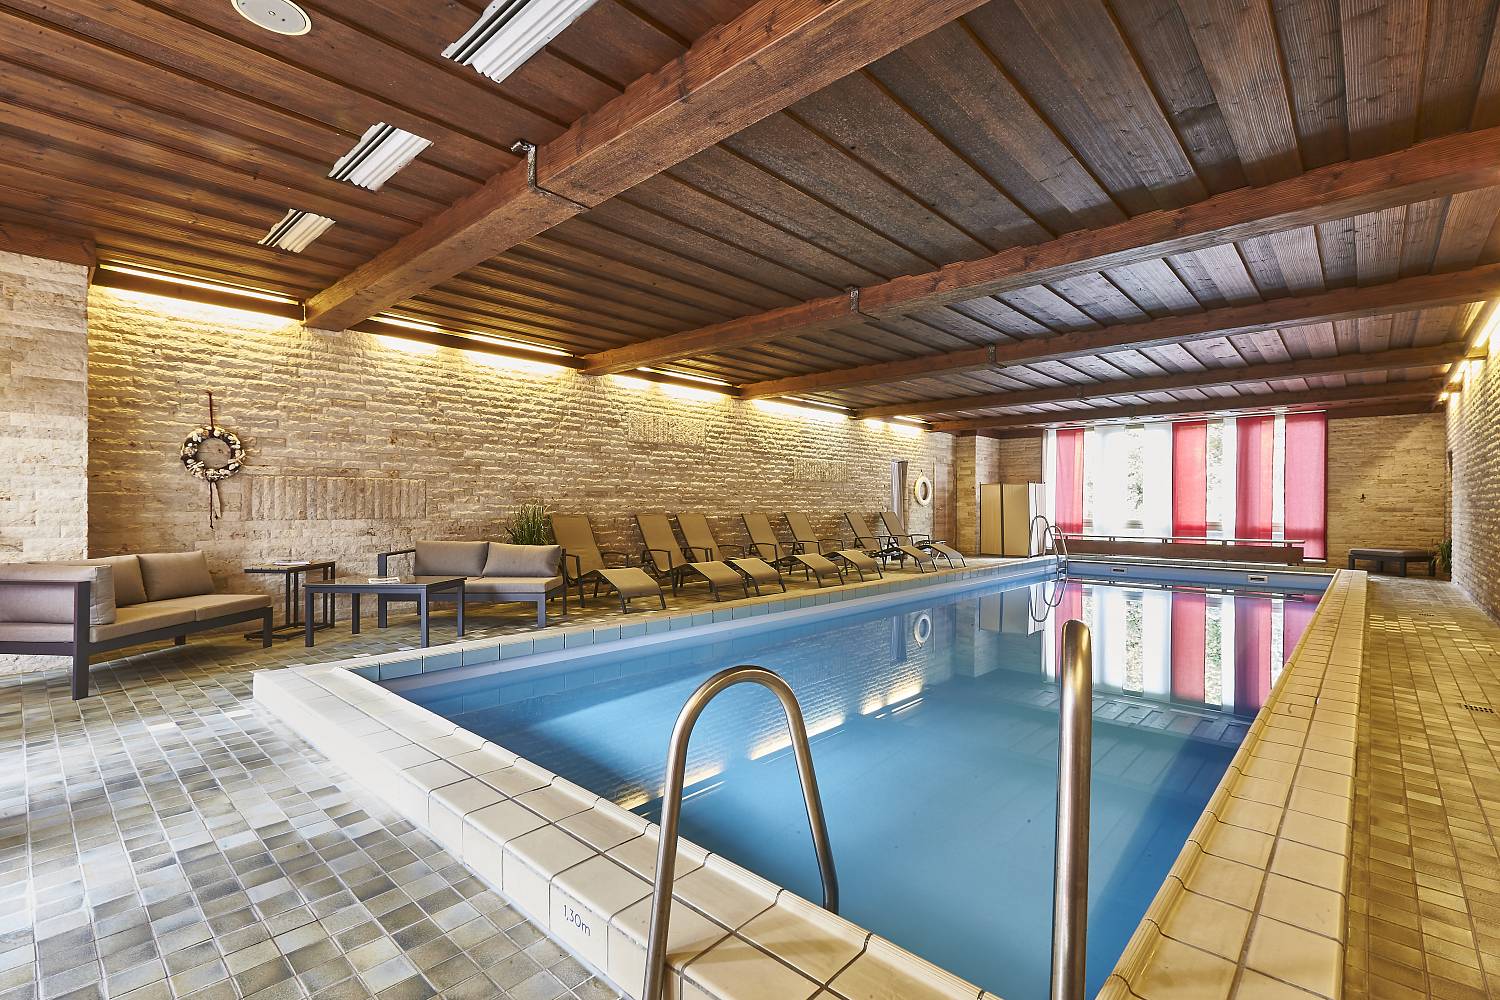 Light-flooded indoor swimming pool with sunbeds, tables and benches